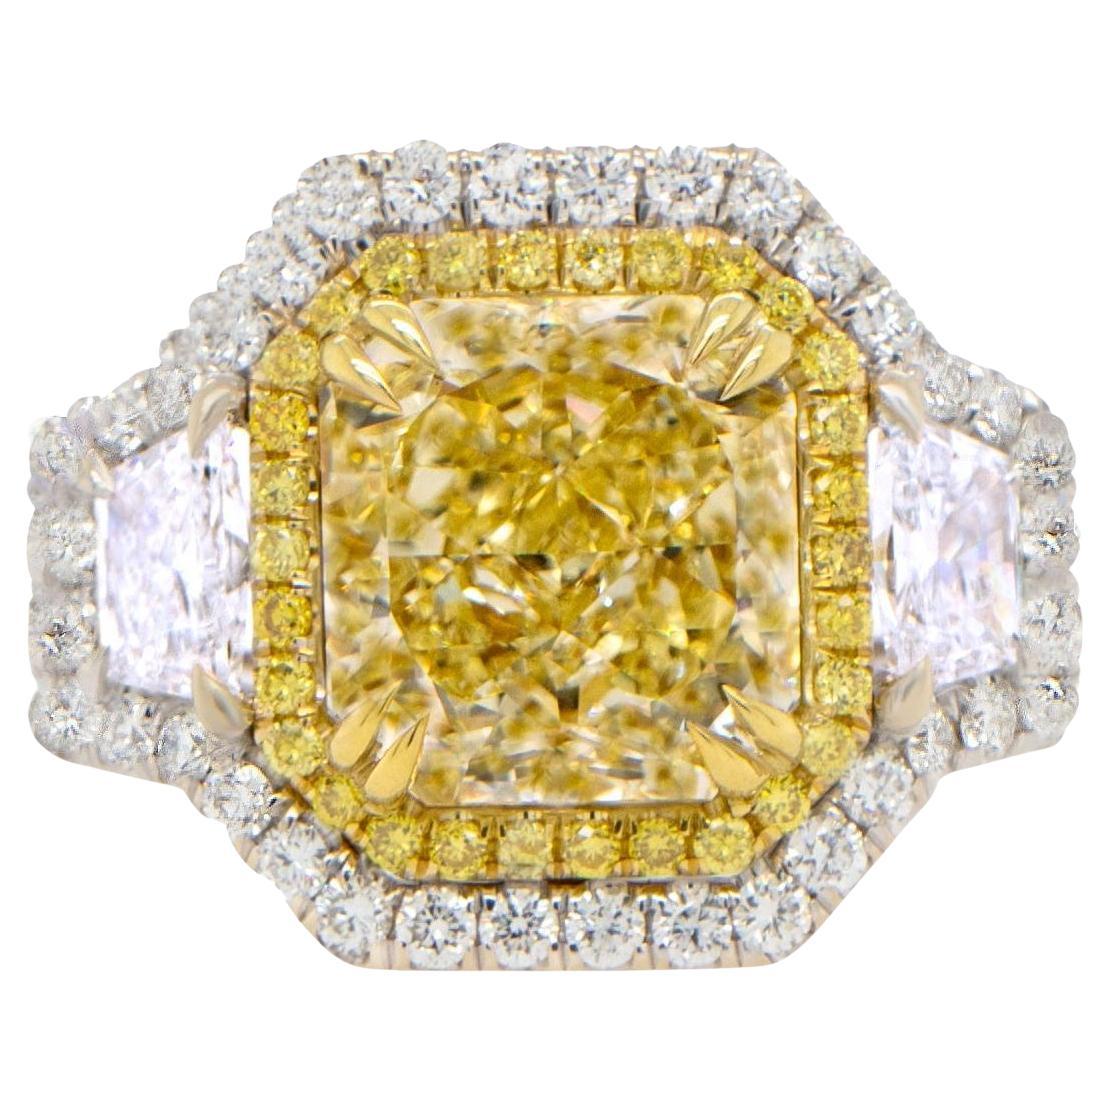 Important GIA Certified Natural Fancy Yellow Diamond Ring 5.23 Carats 18K Gold